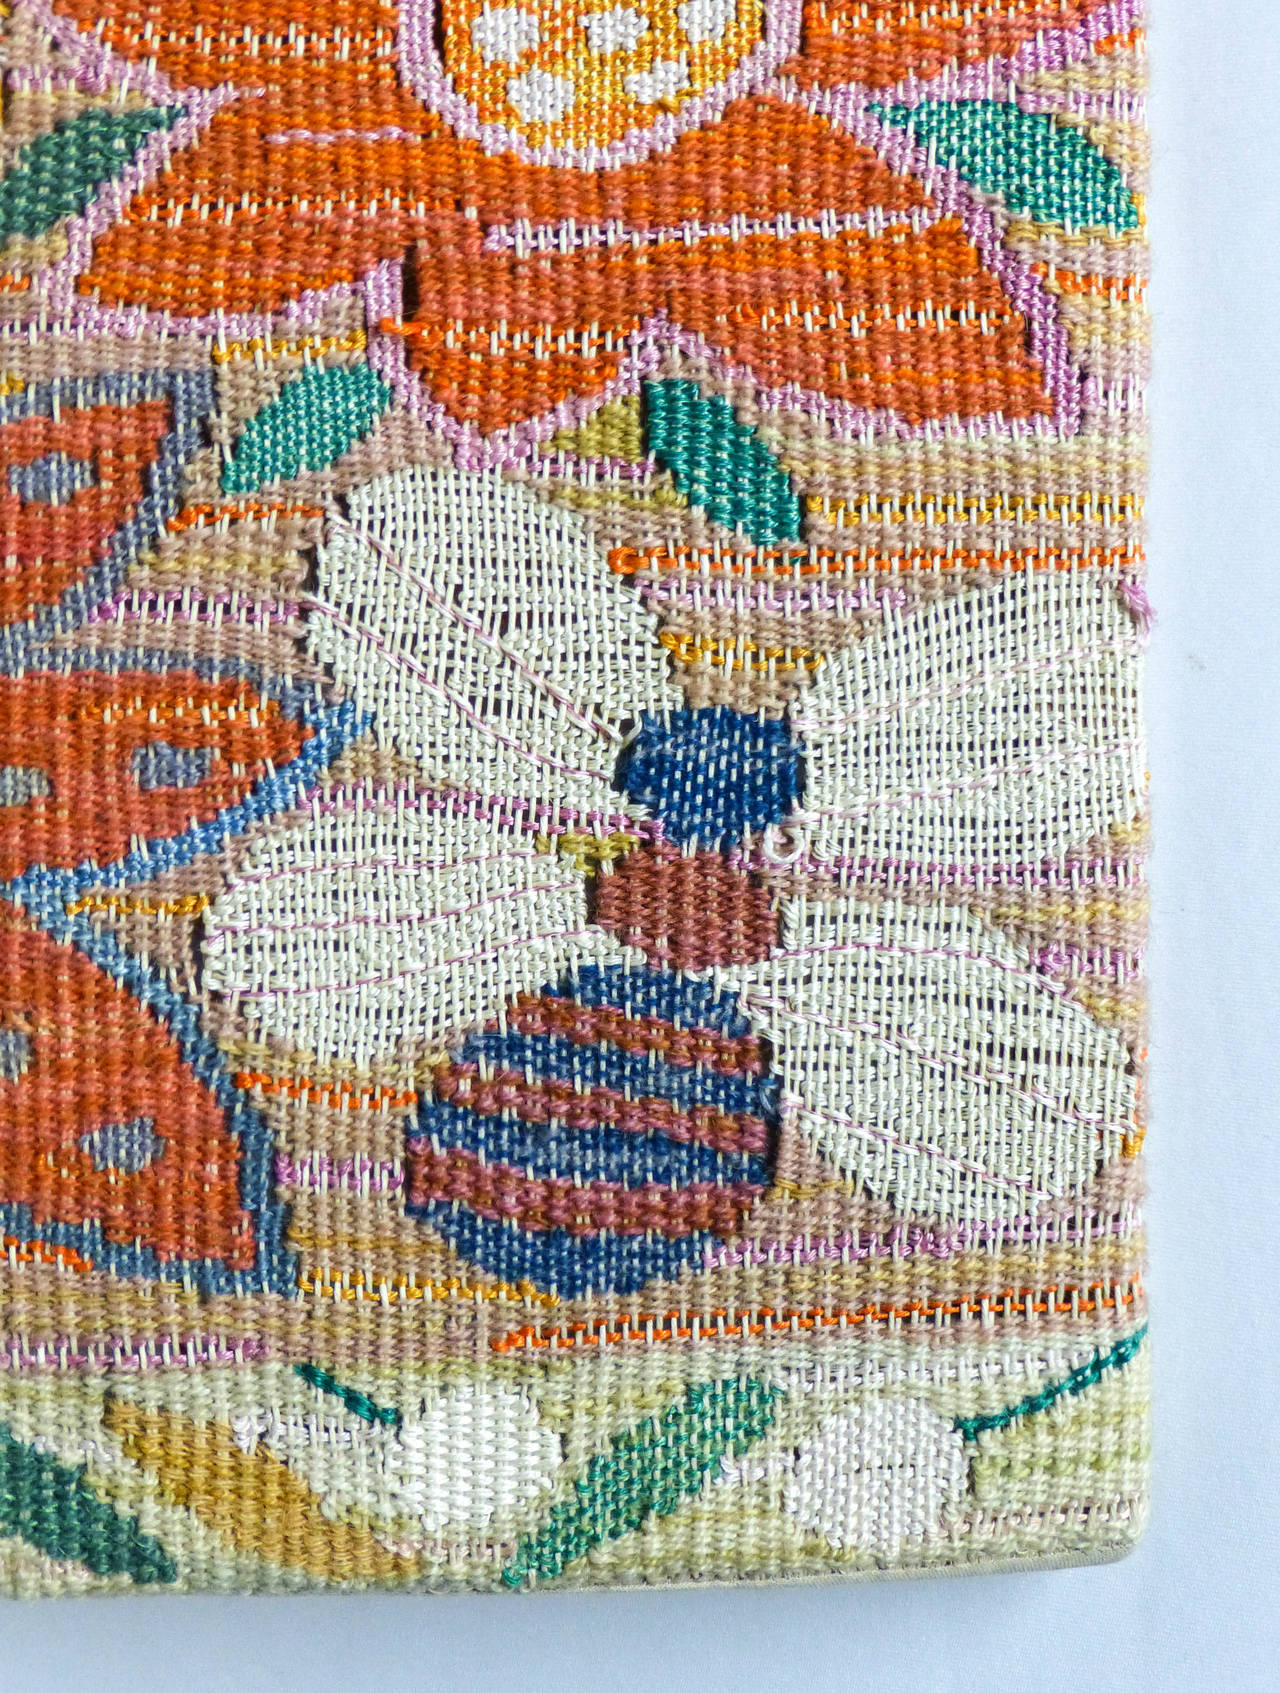 Very colorful and fun wool weaving. A rare piece of textile art by this well known Swedish artist. It is initialed in the weaving on the edge. Circa 1960's. Wool is placed over a wood stretcher for hanging.